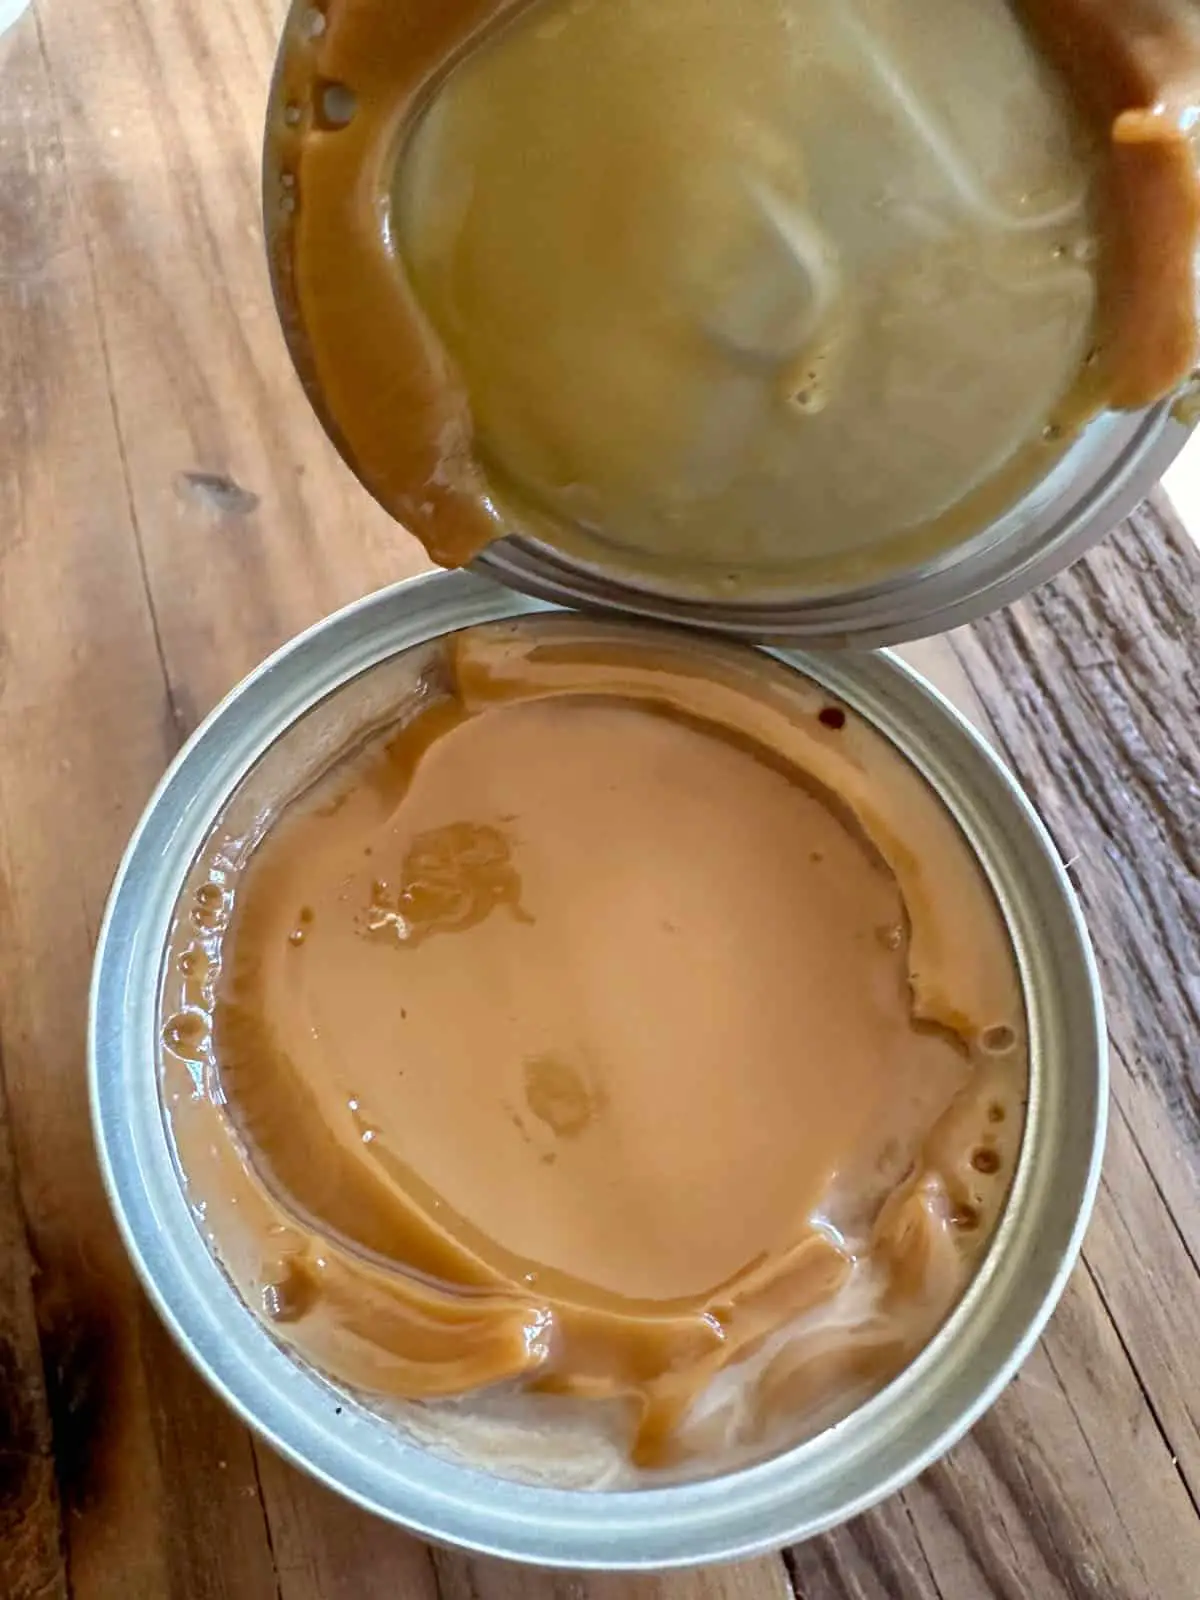 A metal can filled with toffee or dulce de leche.